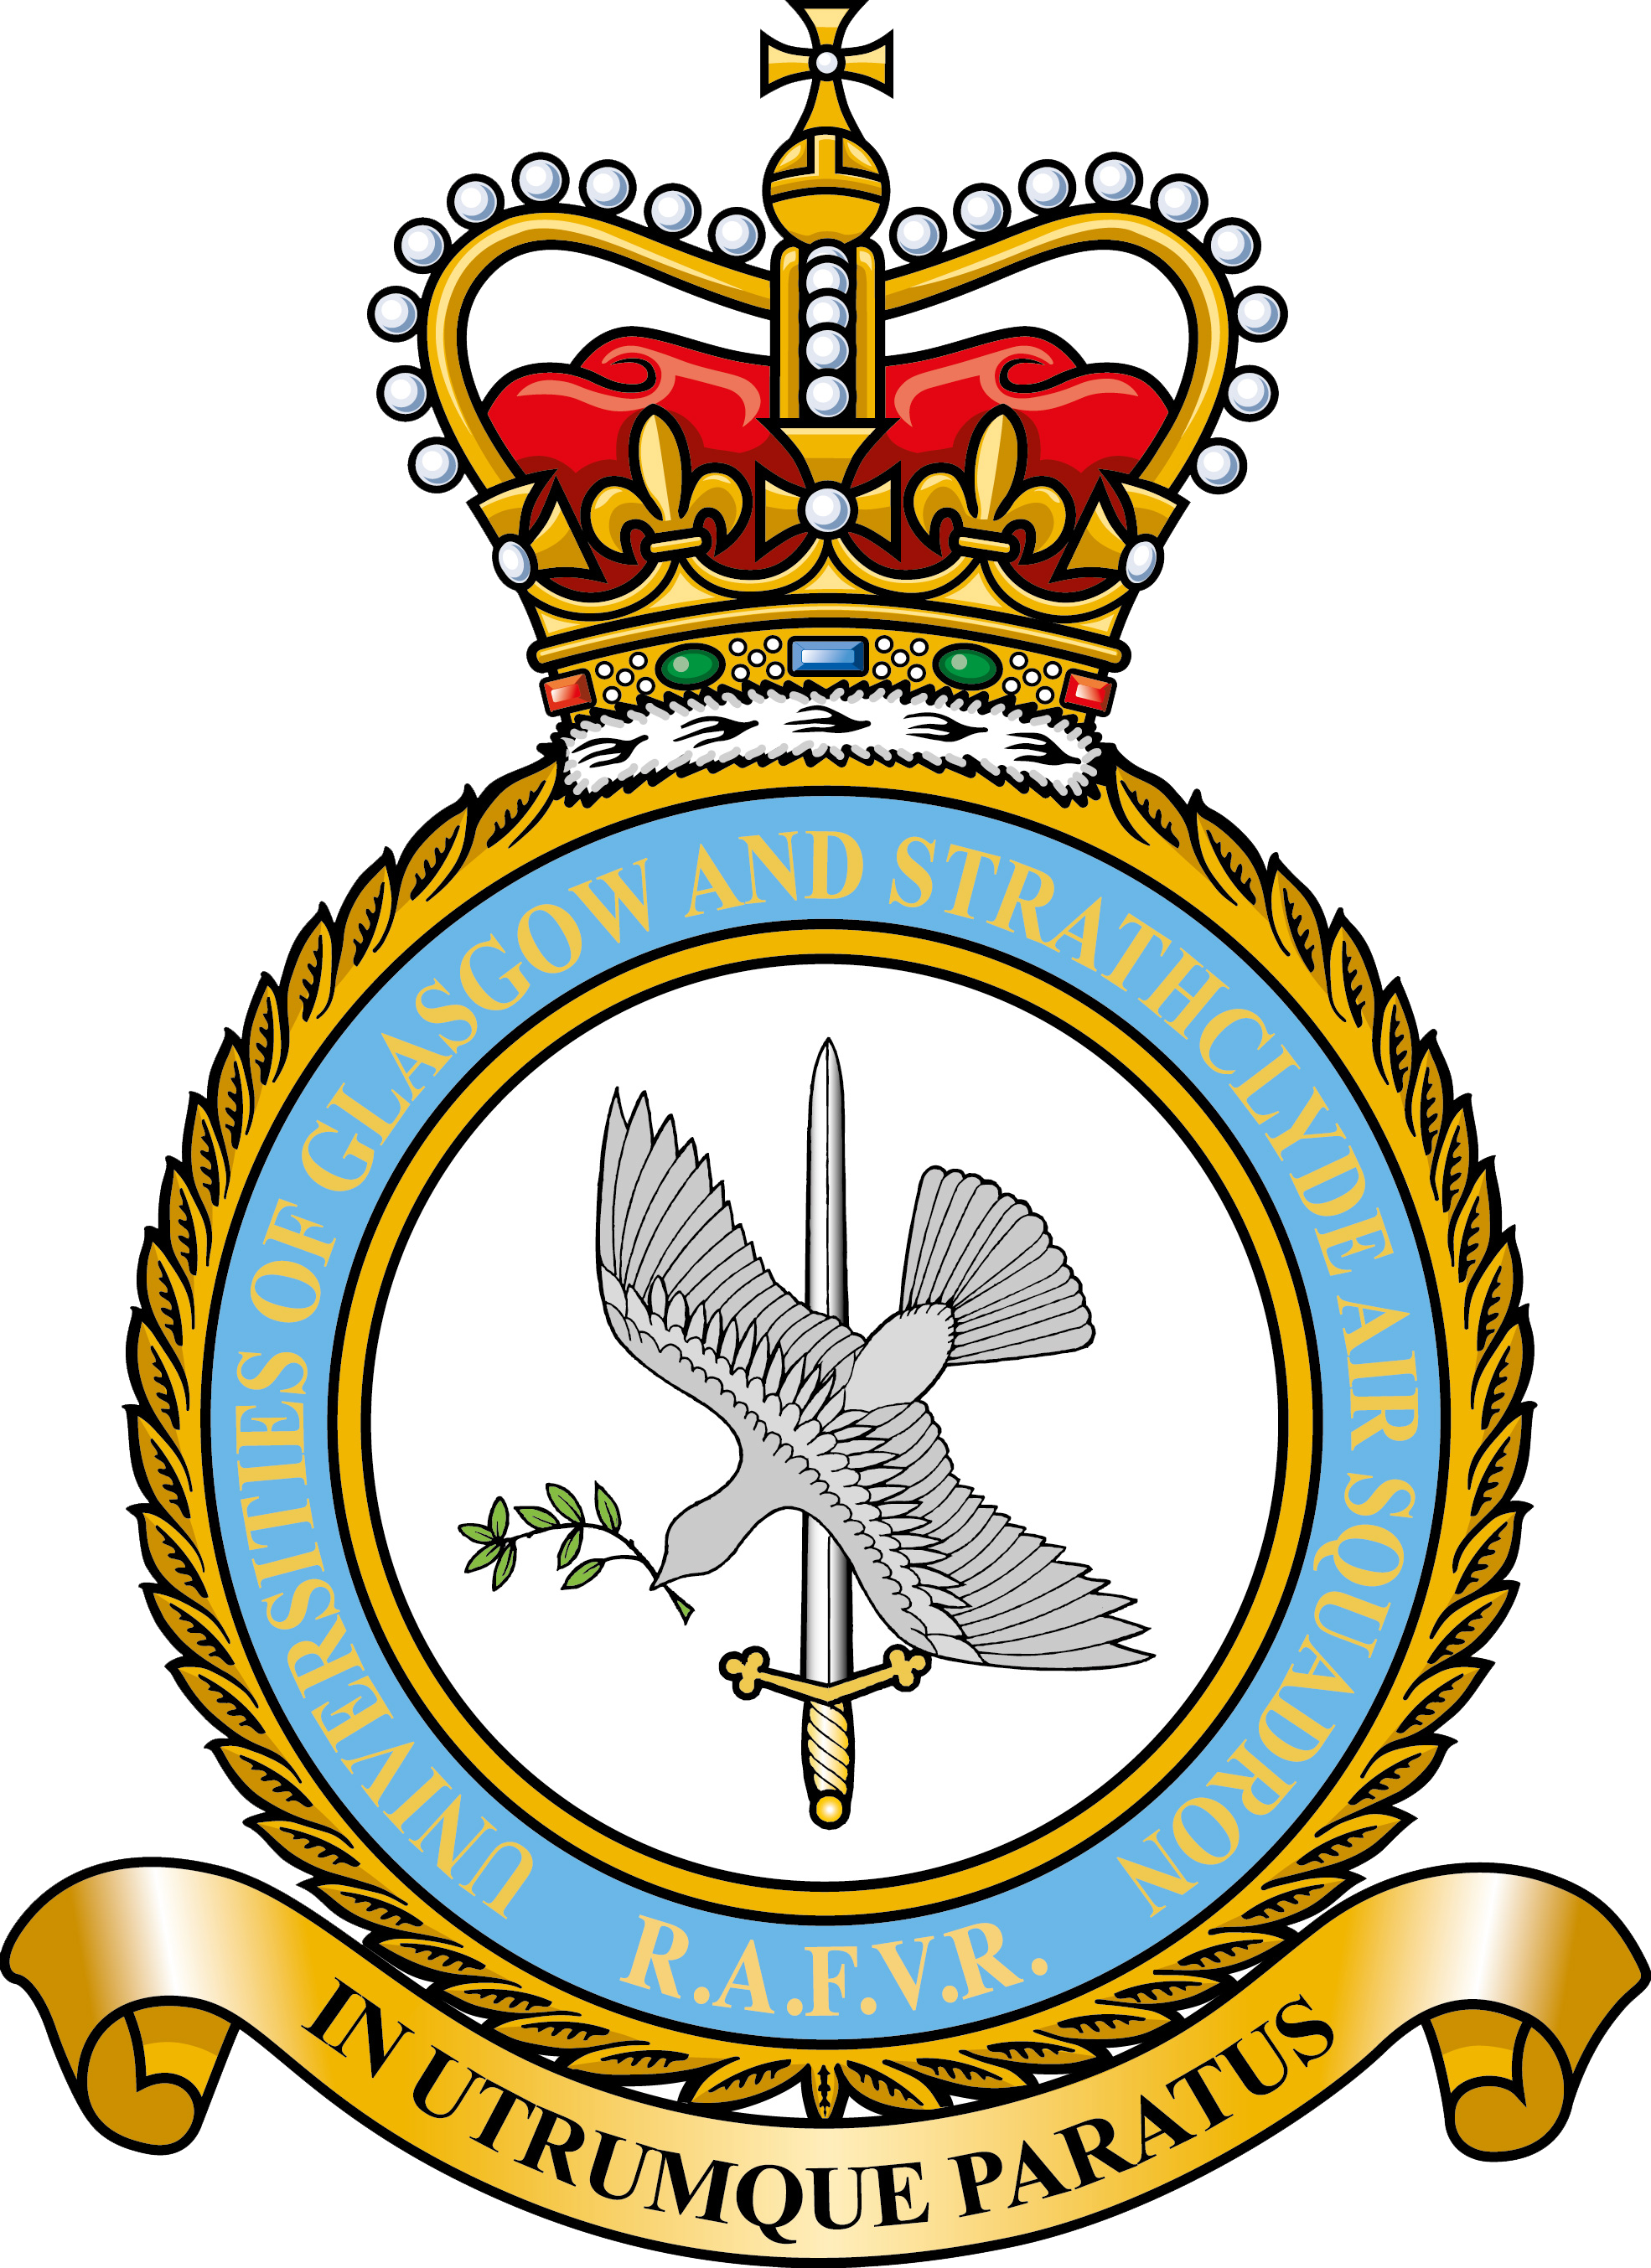 Crest for Universities of Glasgow and Strathclyde Air Squadron